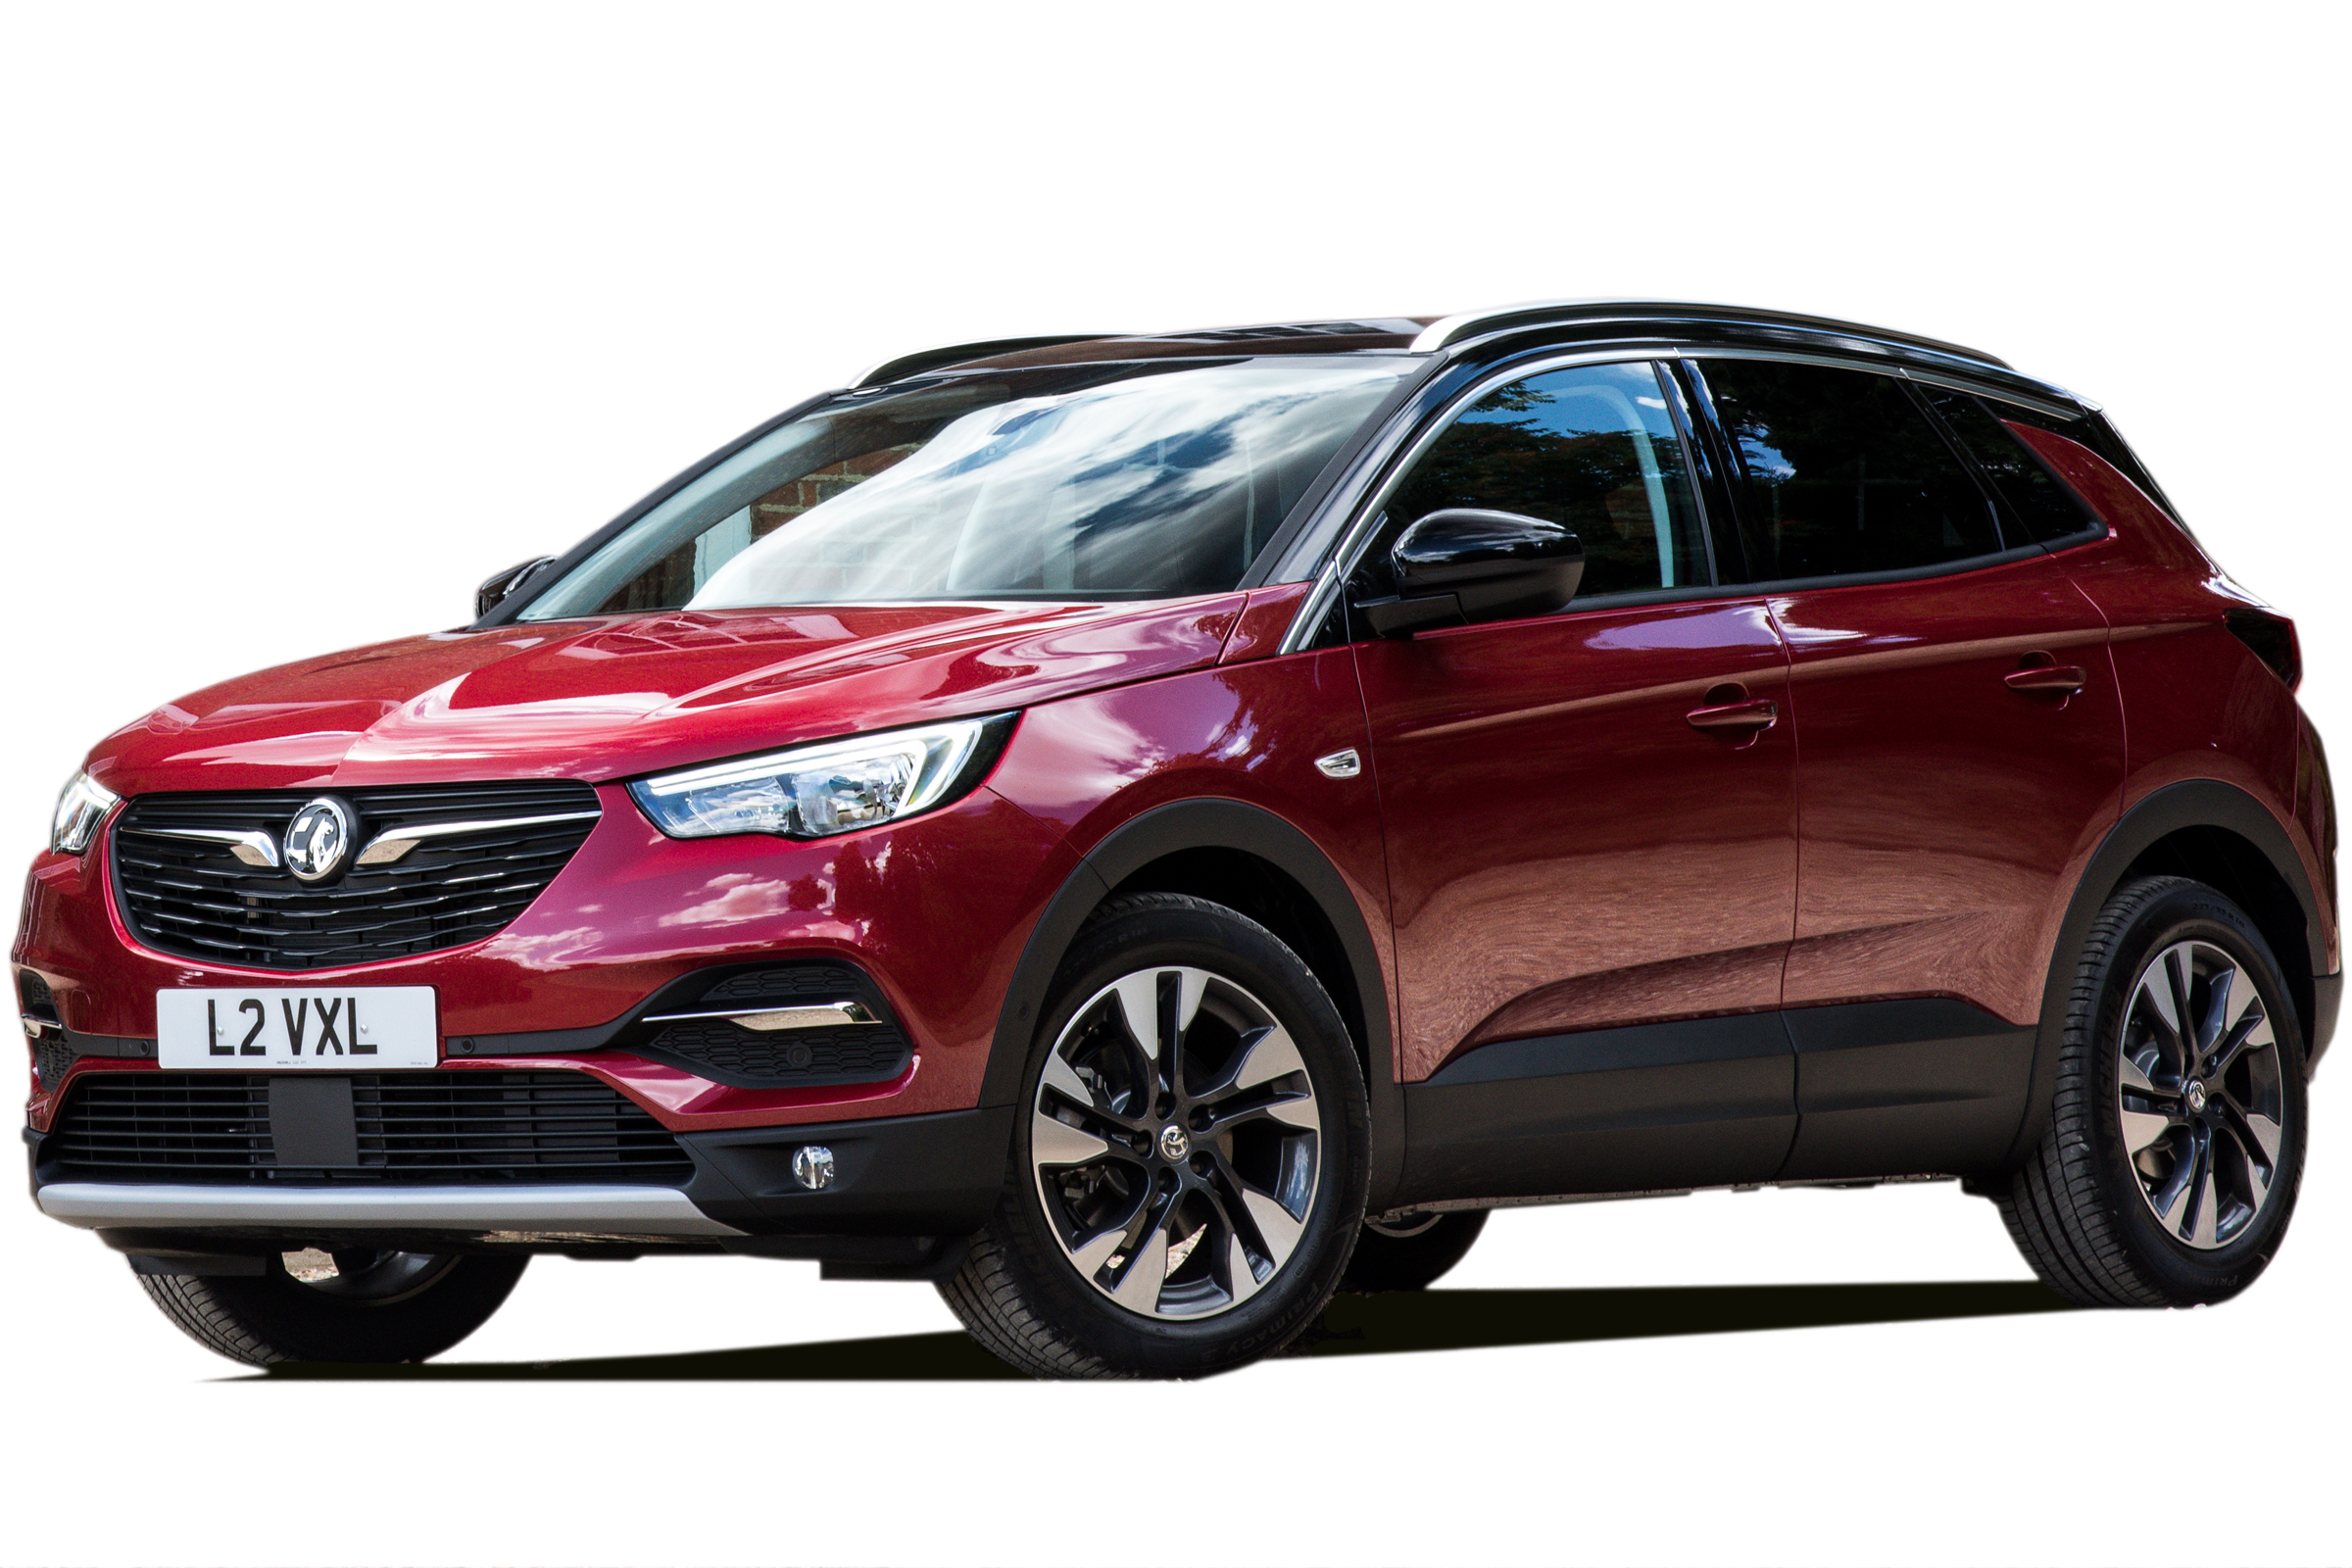 Vauxhall Grandland X Suv Engines Drive Performance Review Carbuyer